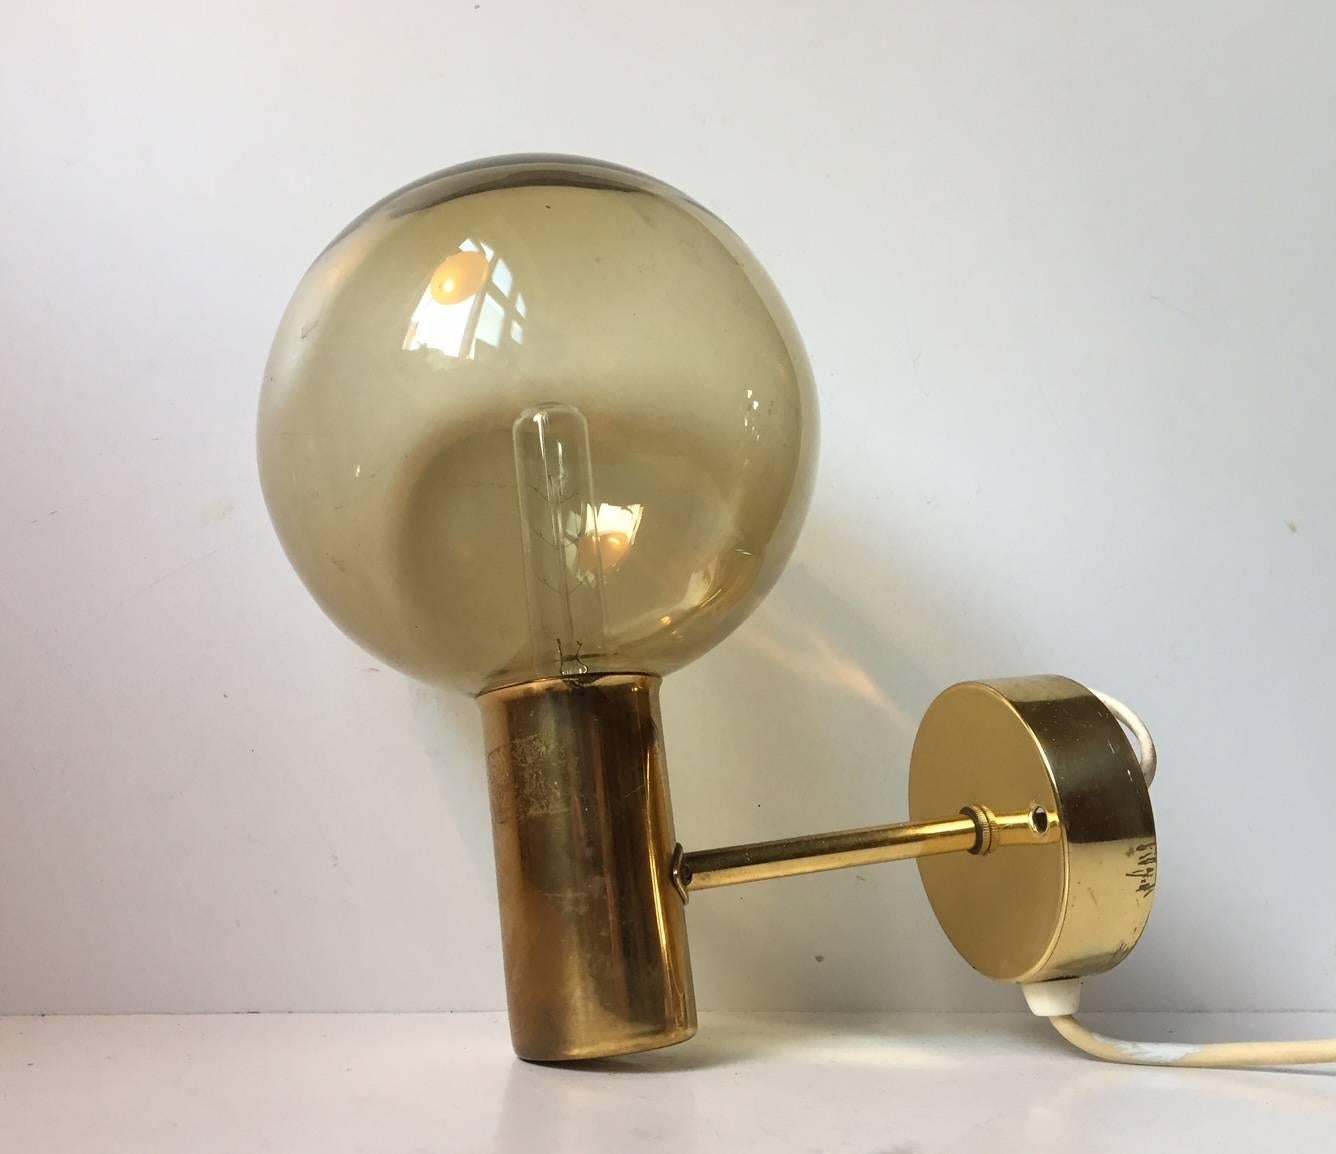 Spherical glass shaded sconce designed by Hans Agne Jakobsson and manufactured by Markaryd AB in Sweden during the 1960s. The model is called V149. Maker/design label still present to the backside of the mount.